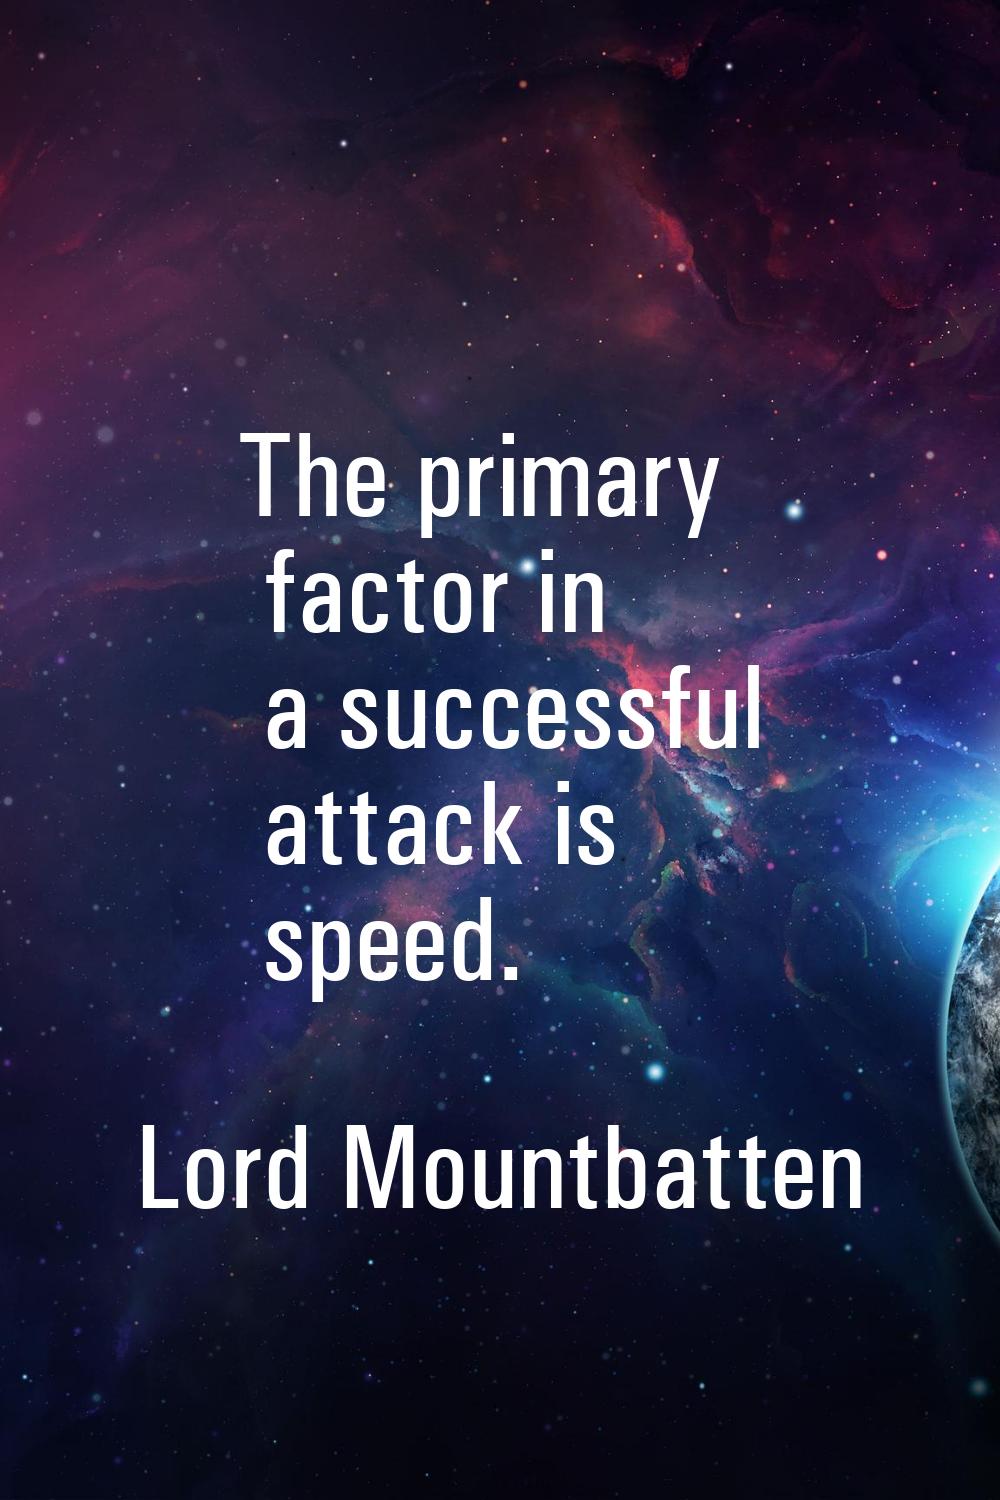 The primary factor in a successful attack is speed.